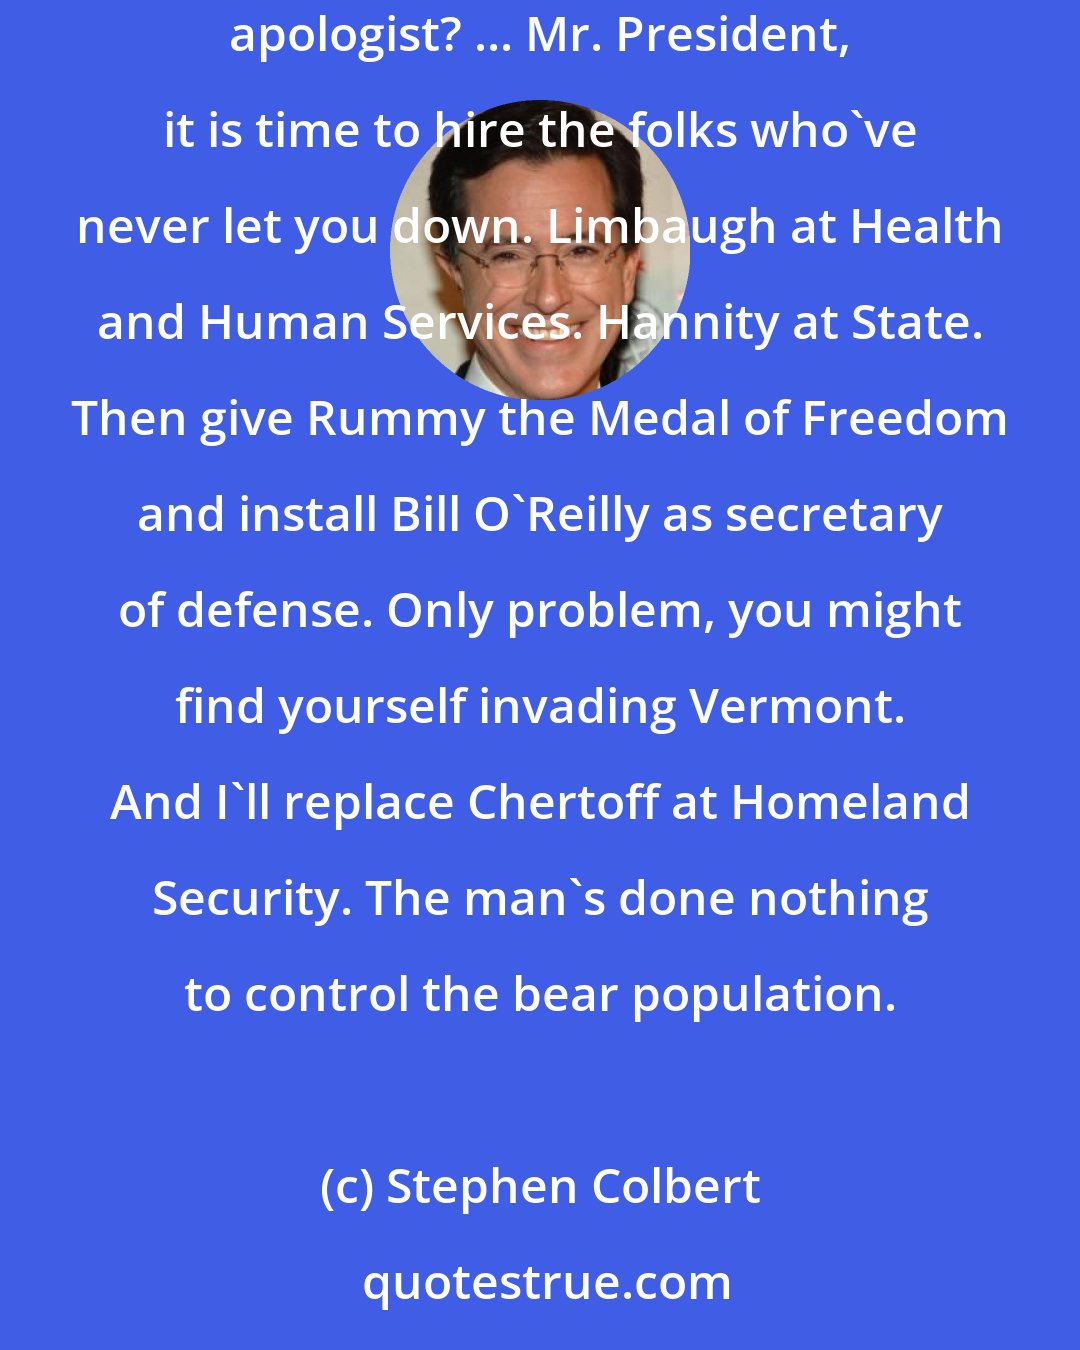 Stephen Colbert: TV's Tony Snow becomes the White House press secretary. How will he make the difficult transition from Fox News reporter to Republican apologist? ... Mr. President, it is time to hire the folks who've never let you down. Limbaugh at Health and Human Services. Hannity at State. Then give Rummy the Medal of Freedom and install Bill O'Reilly as secretary of defense. Only problem, you might find yourself invading Vermont. And I'll replace Chertoff at Homeland Security. The man's done nothing to control the bear population.